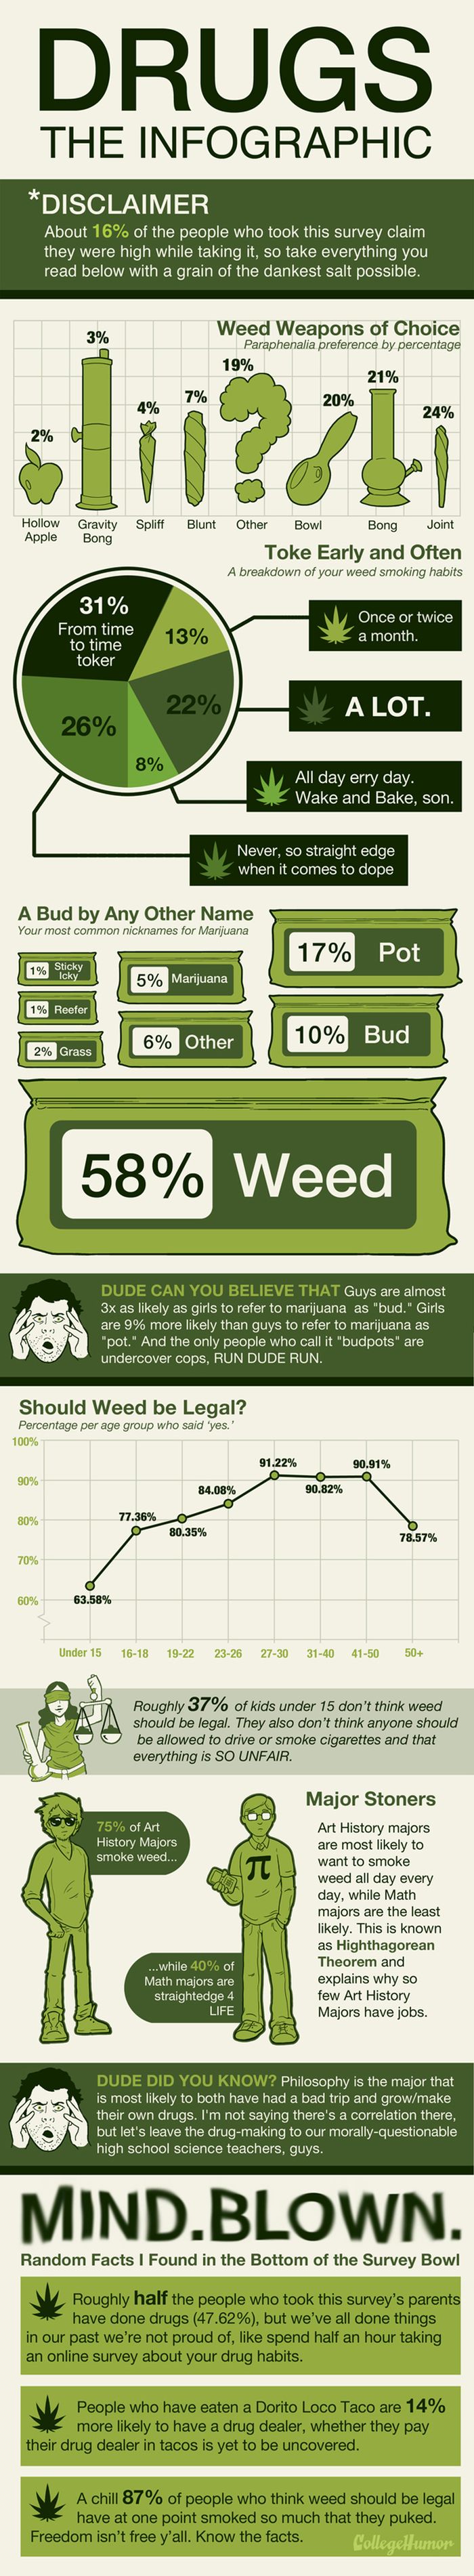 facts-about-weed-infographic